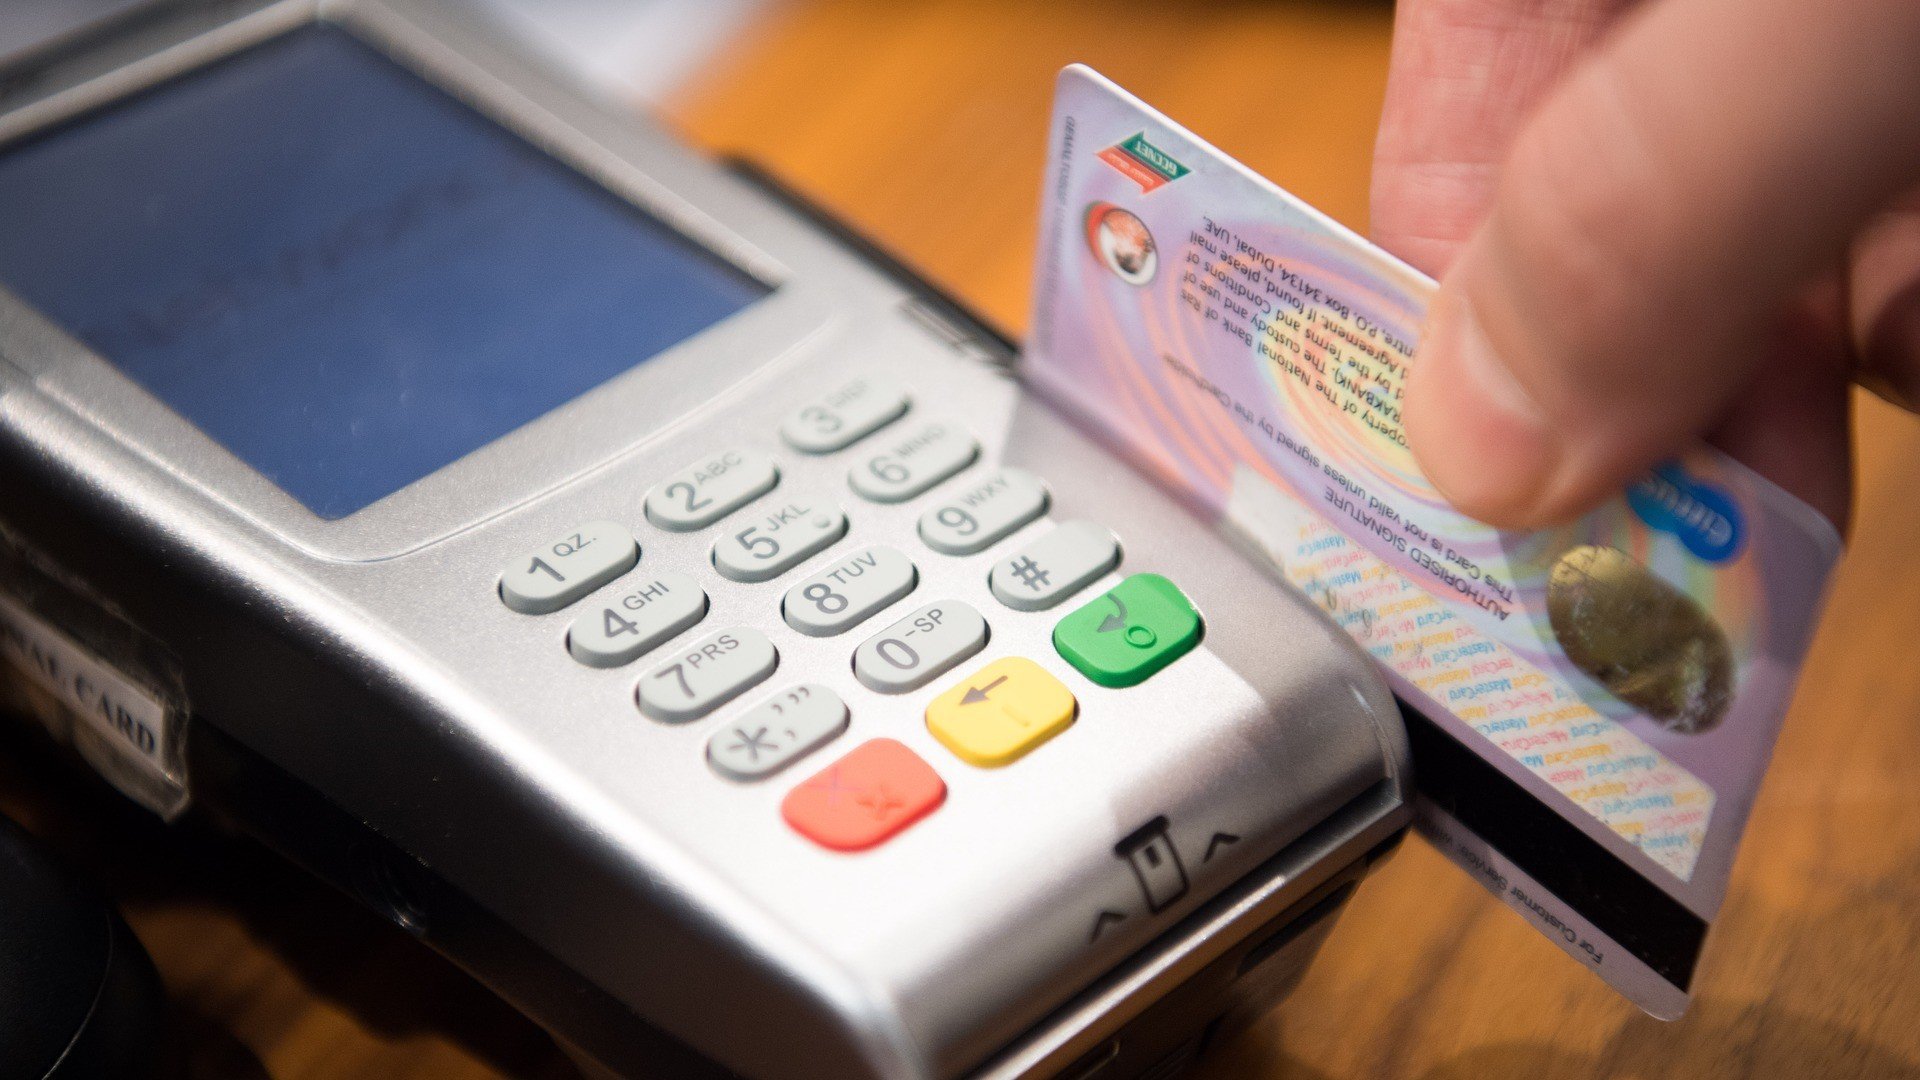 Hungarians Took Out Record Amount of Consumer Loans Last Year